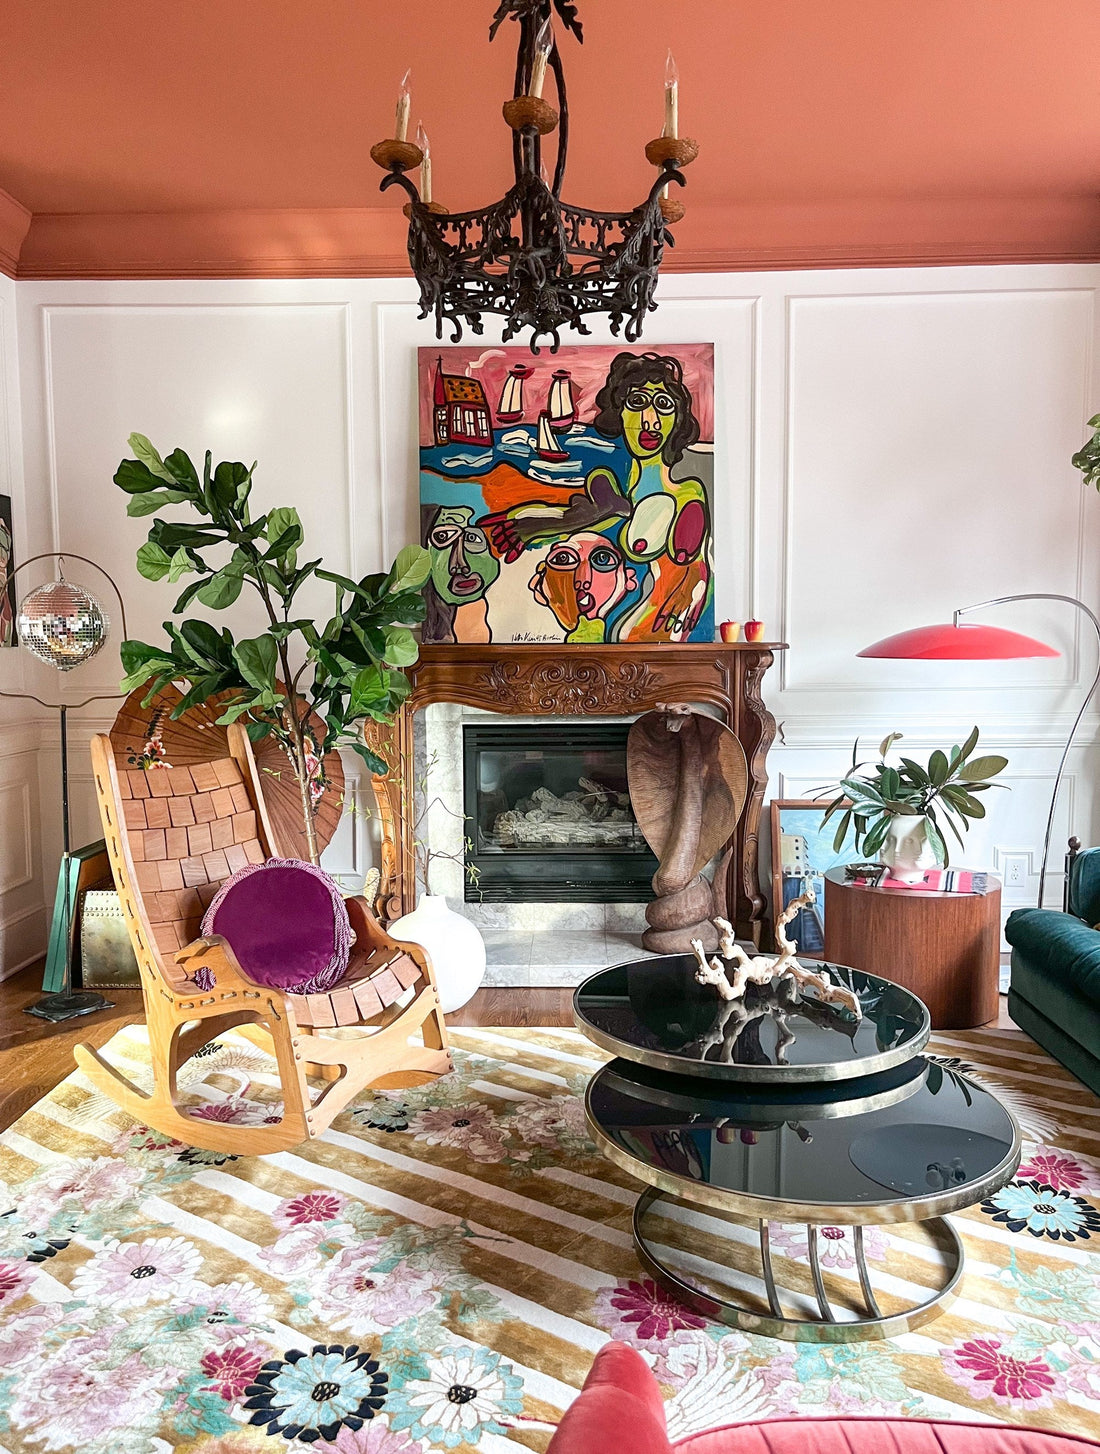 Living life in colour with designer Natalie Papier